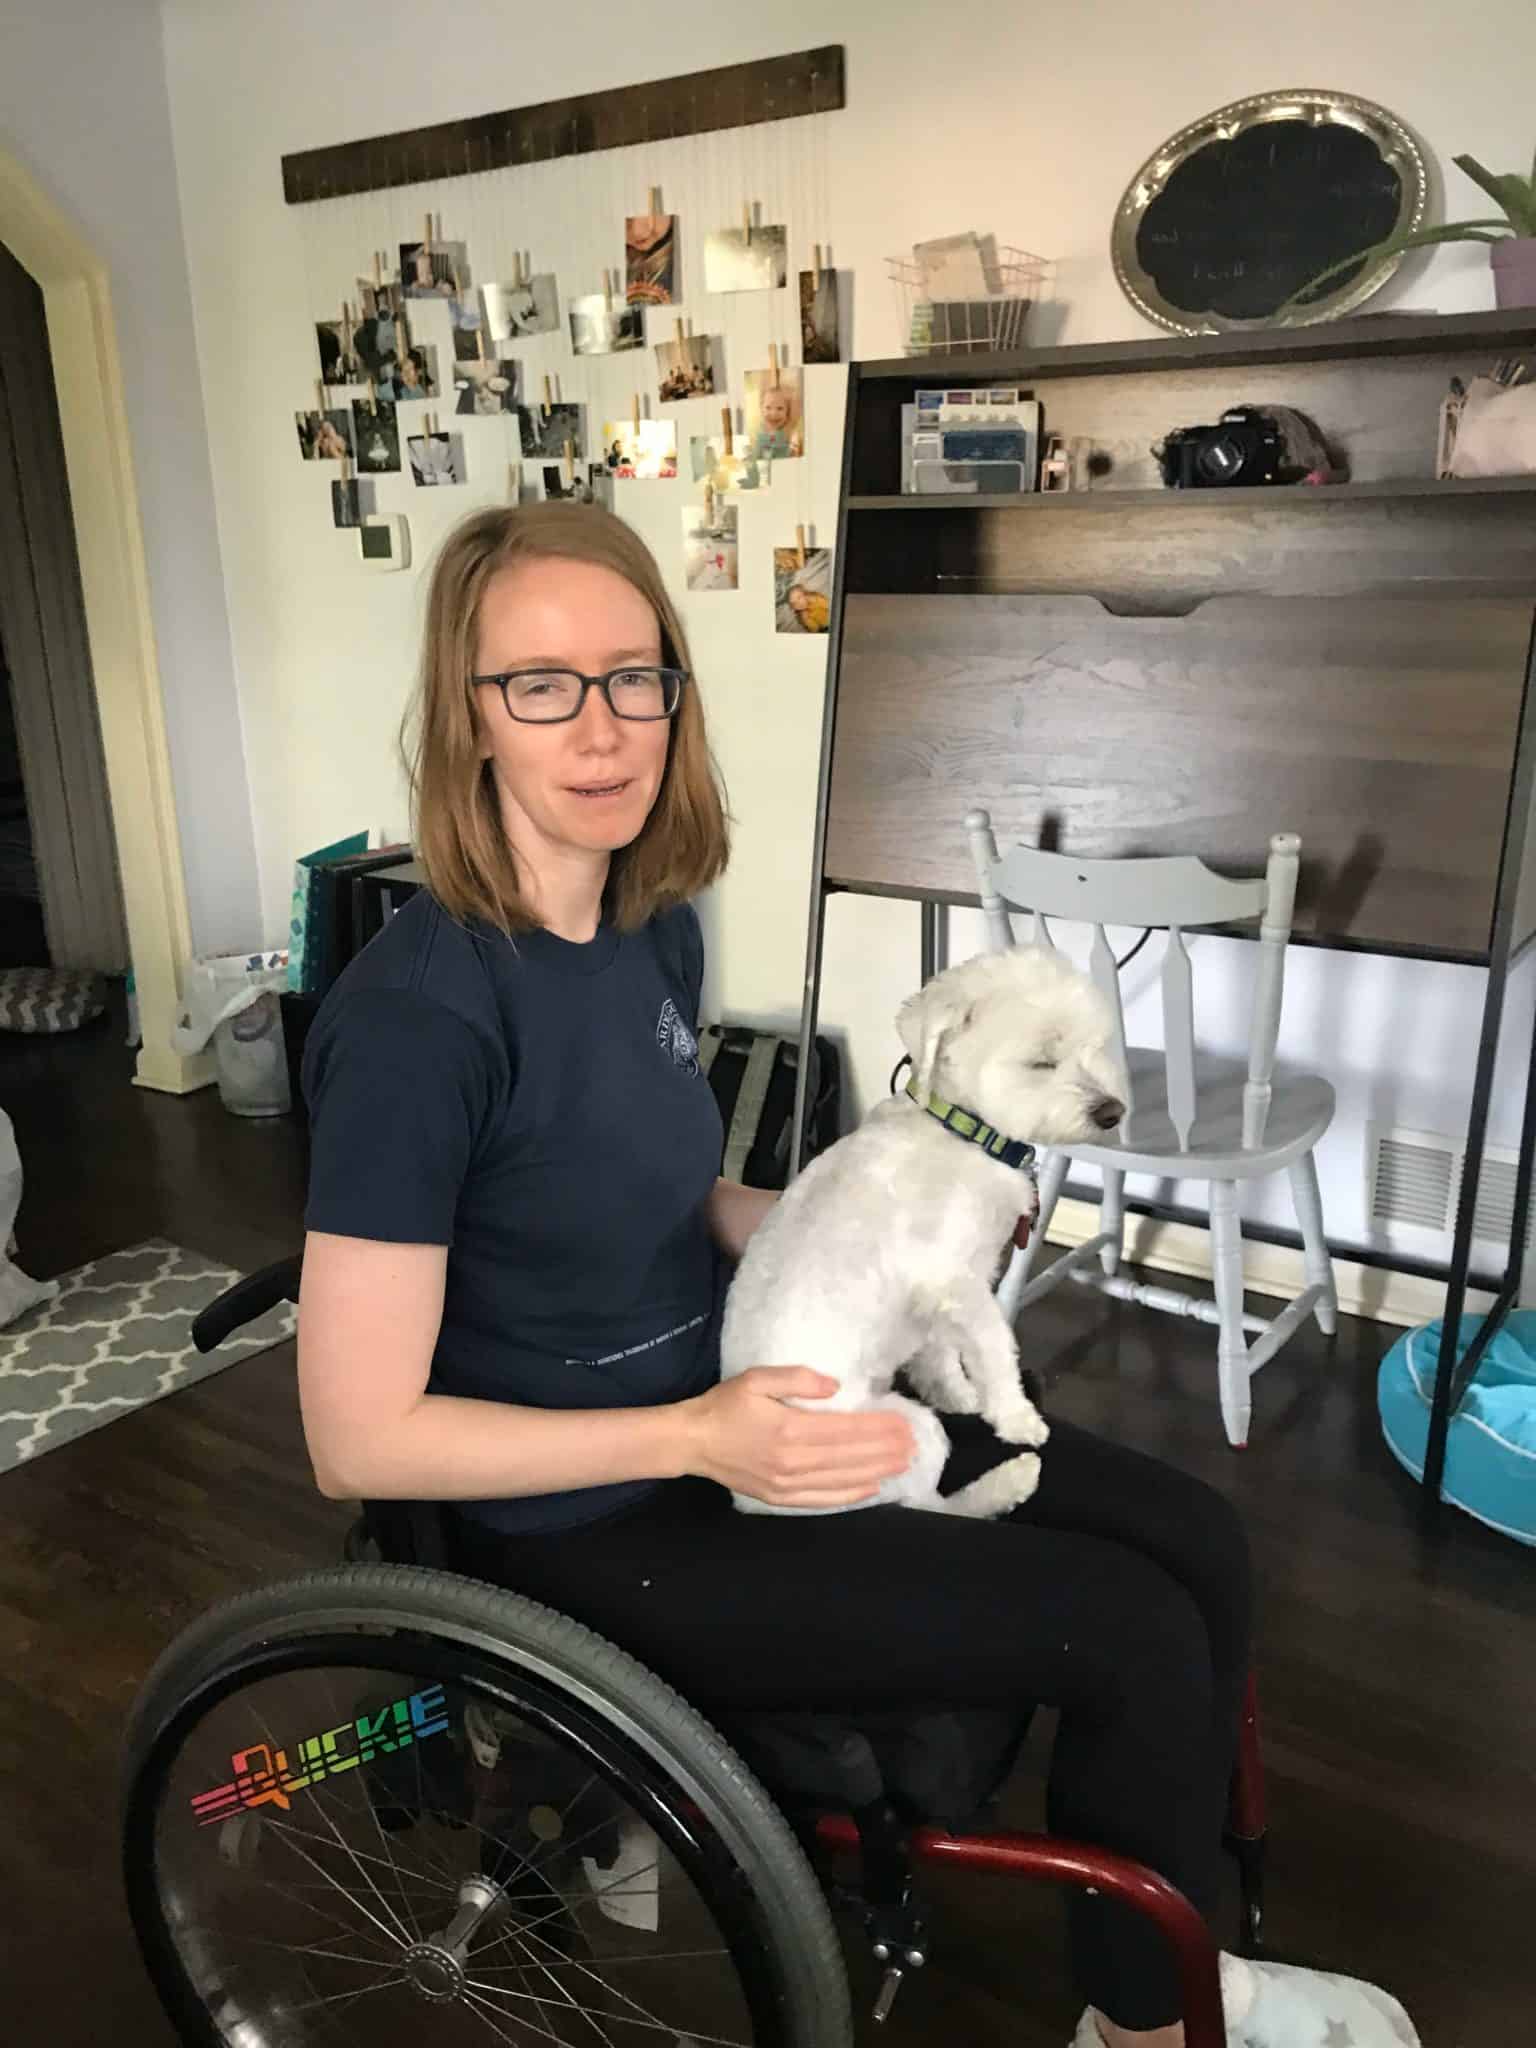 Lumalia sitting in a wheelchair when her POTS autoimmune disease was at it's worst with her dog on her lap